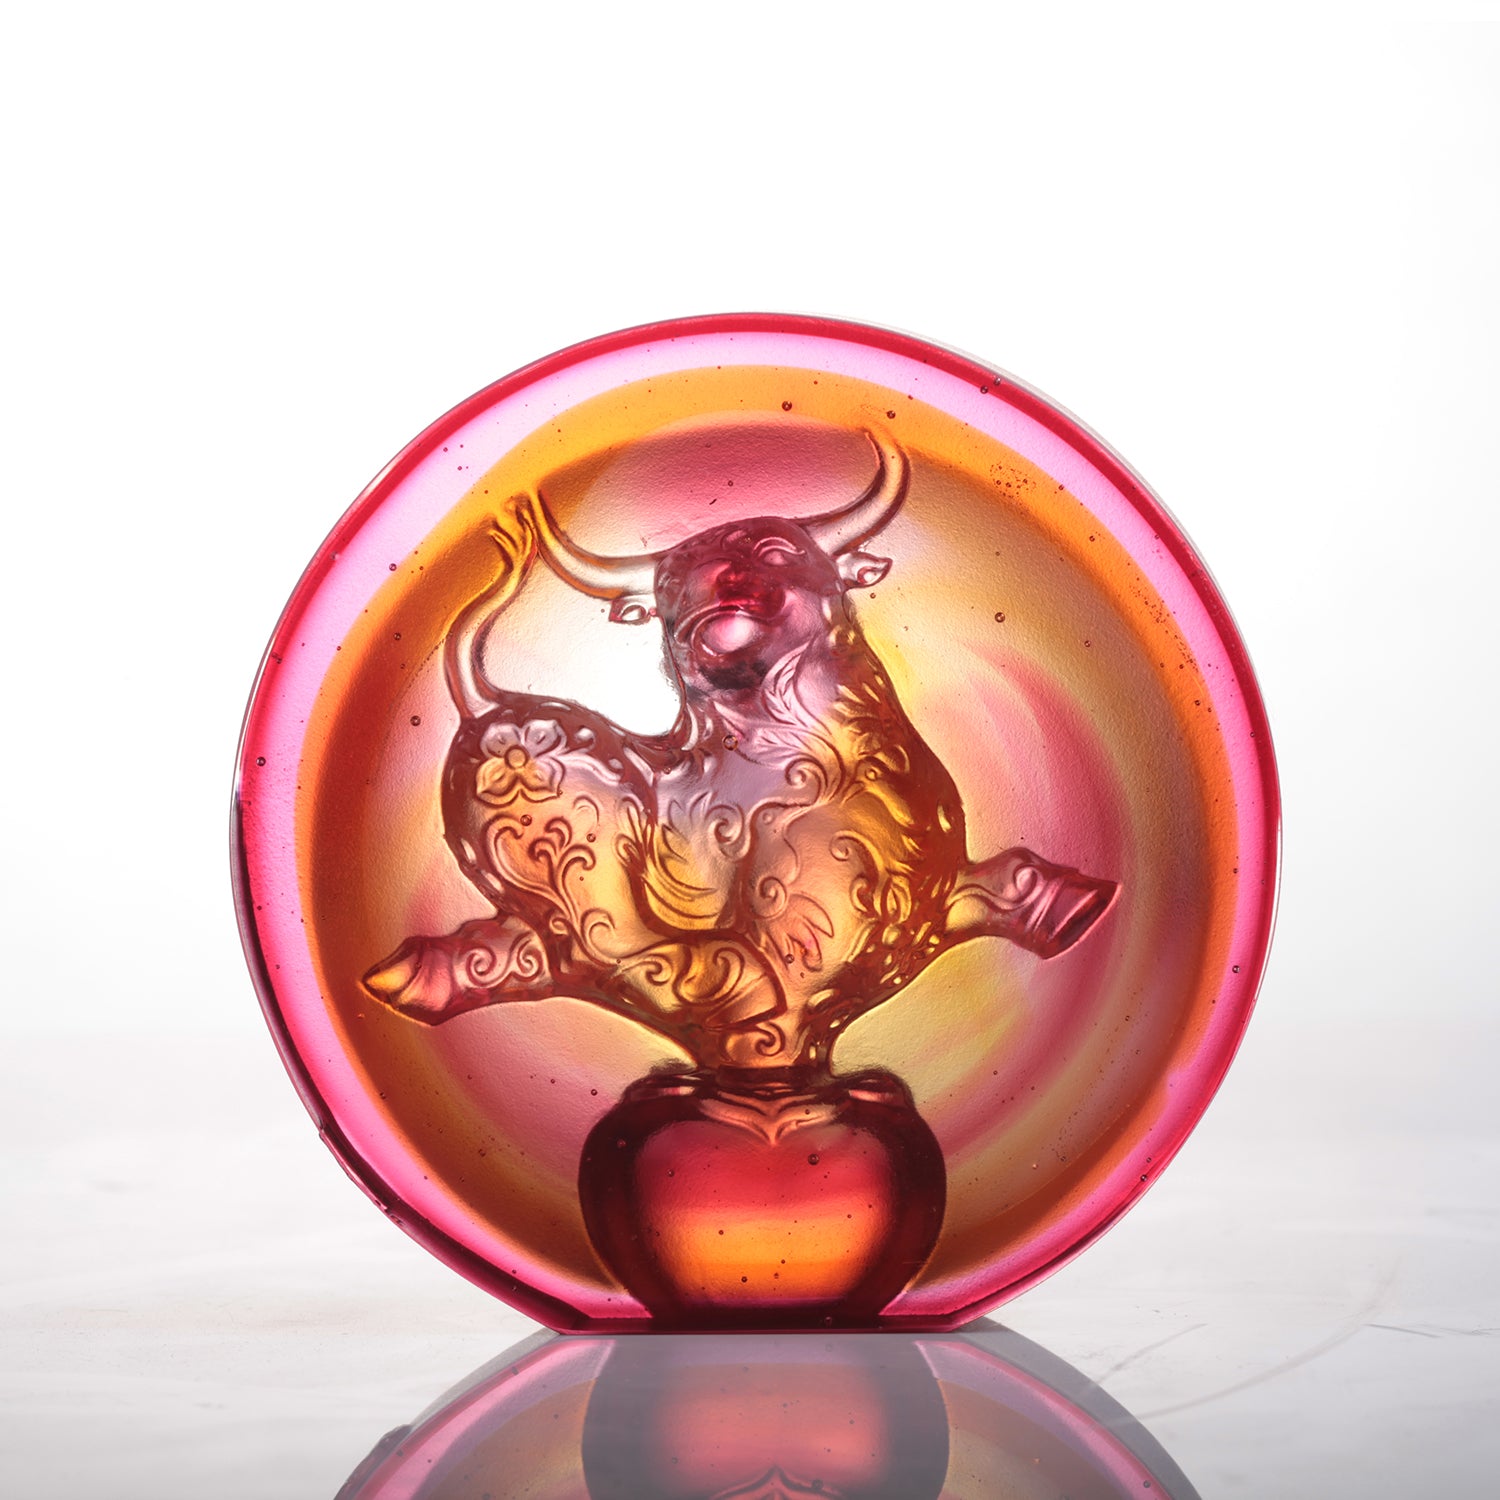 LIULI Year of the Ox Meaning Crystal Paperweight The Joyful Spirit of the Ox - LIULI Crystal Art